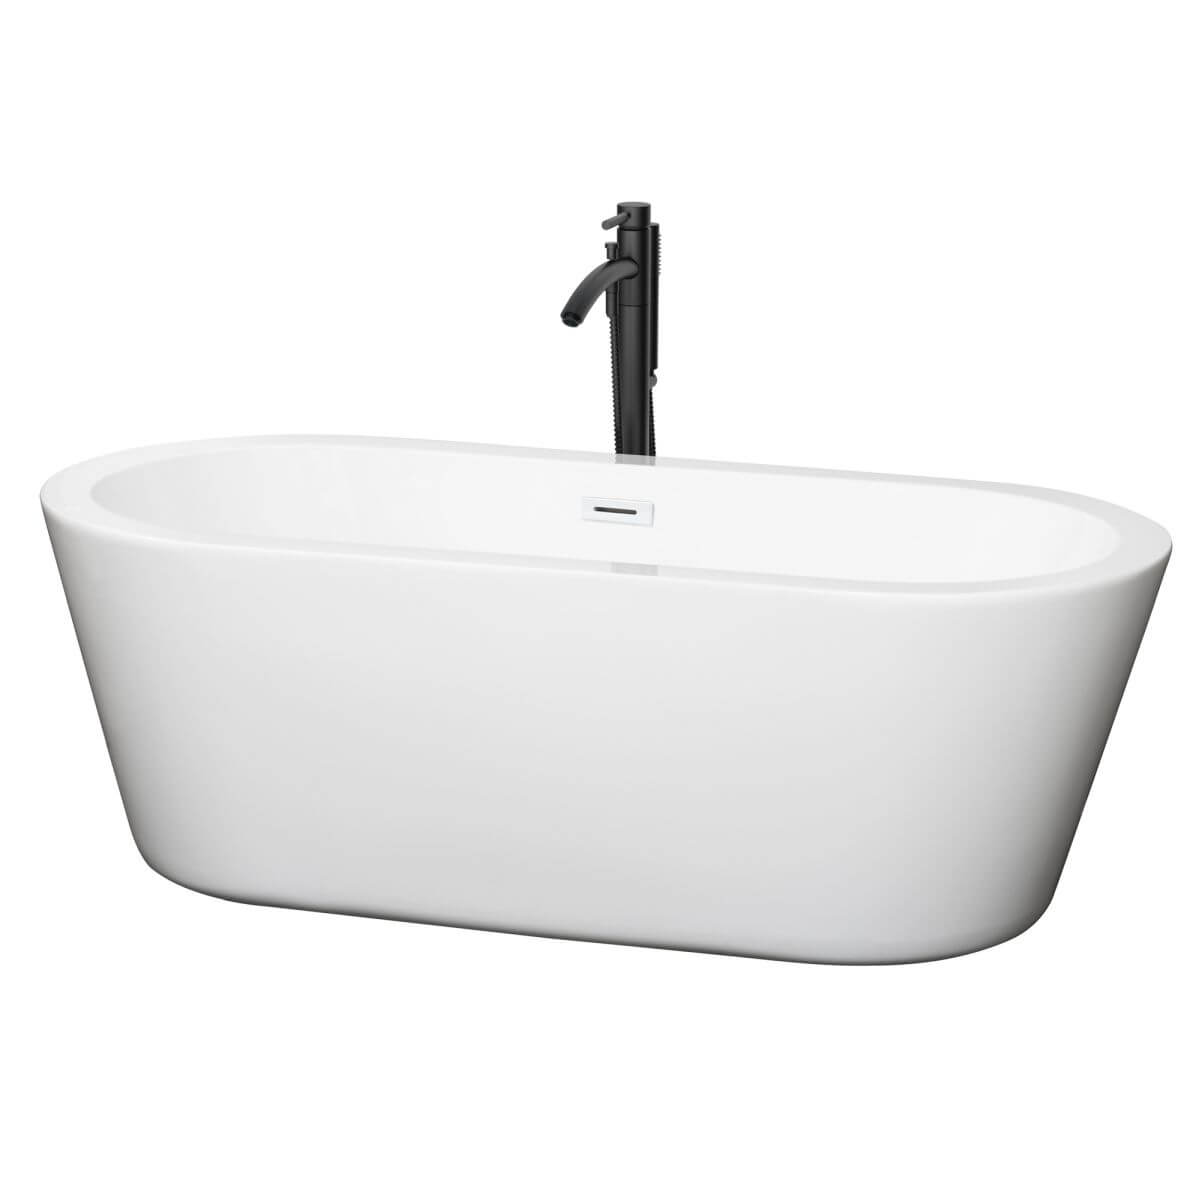 Wyndham Collection Mermaid 67 inch Freestanding Bathtub in White with Shiny White Trim and Floor Mounted Faucet in Matte Black - WCOBT100367SWATPBK